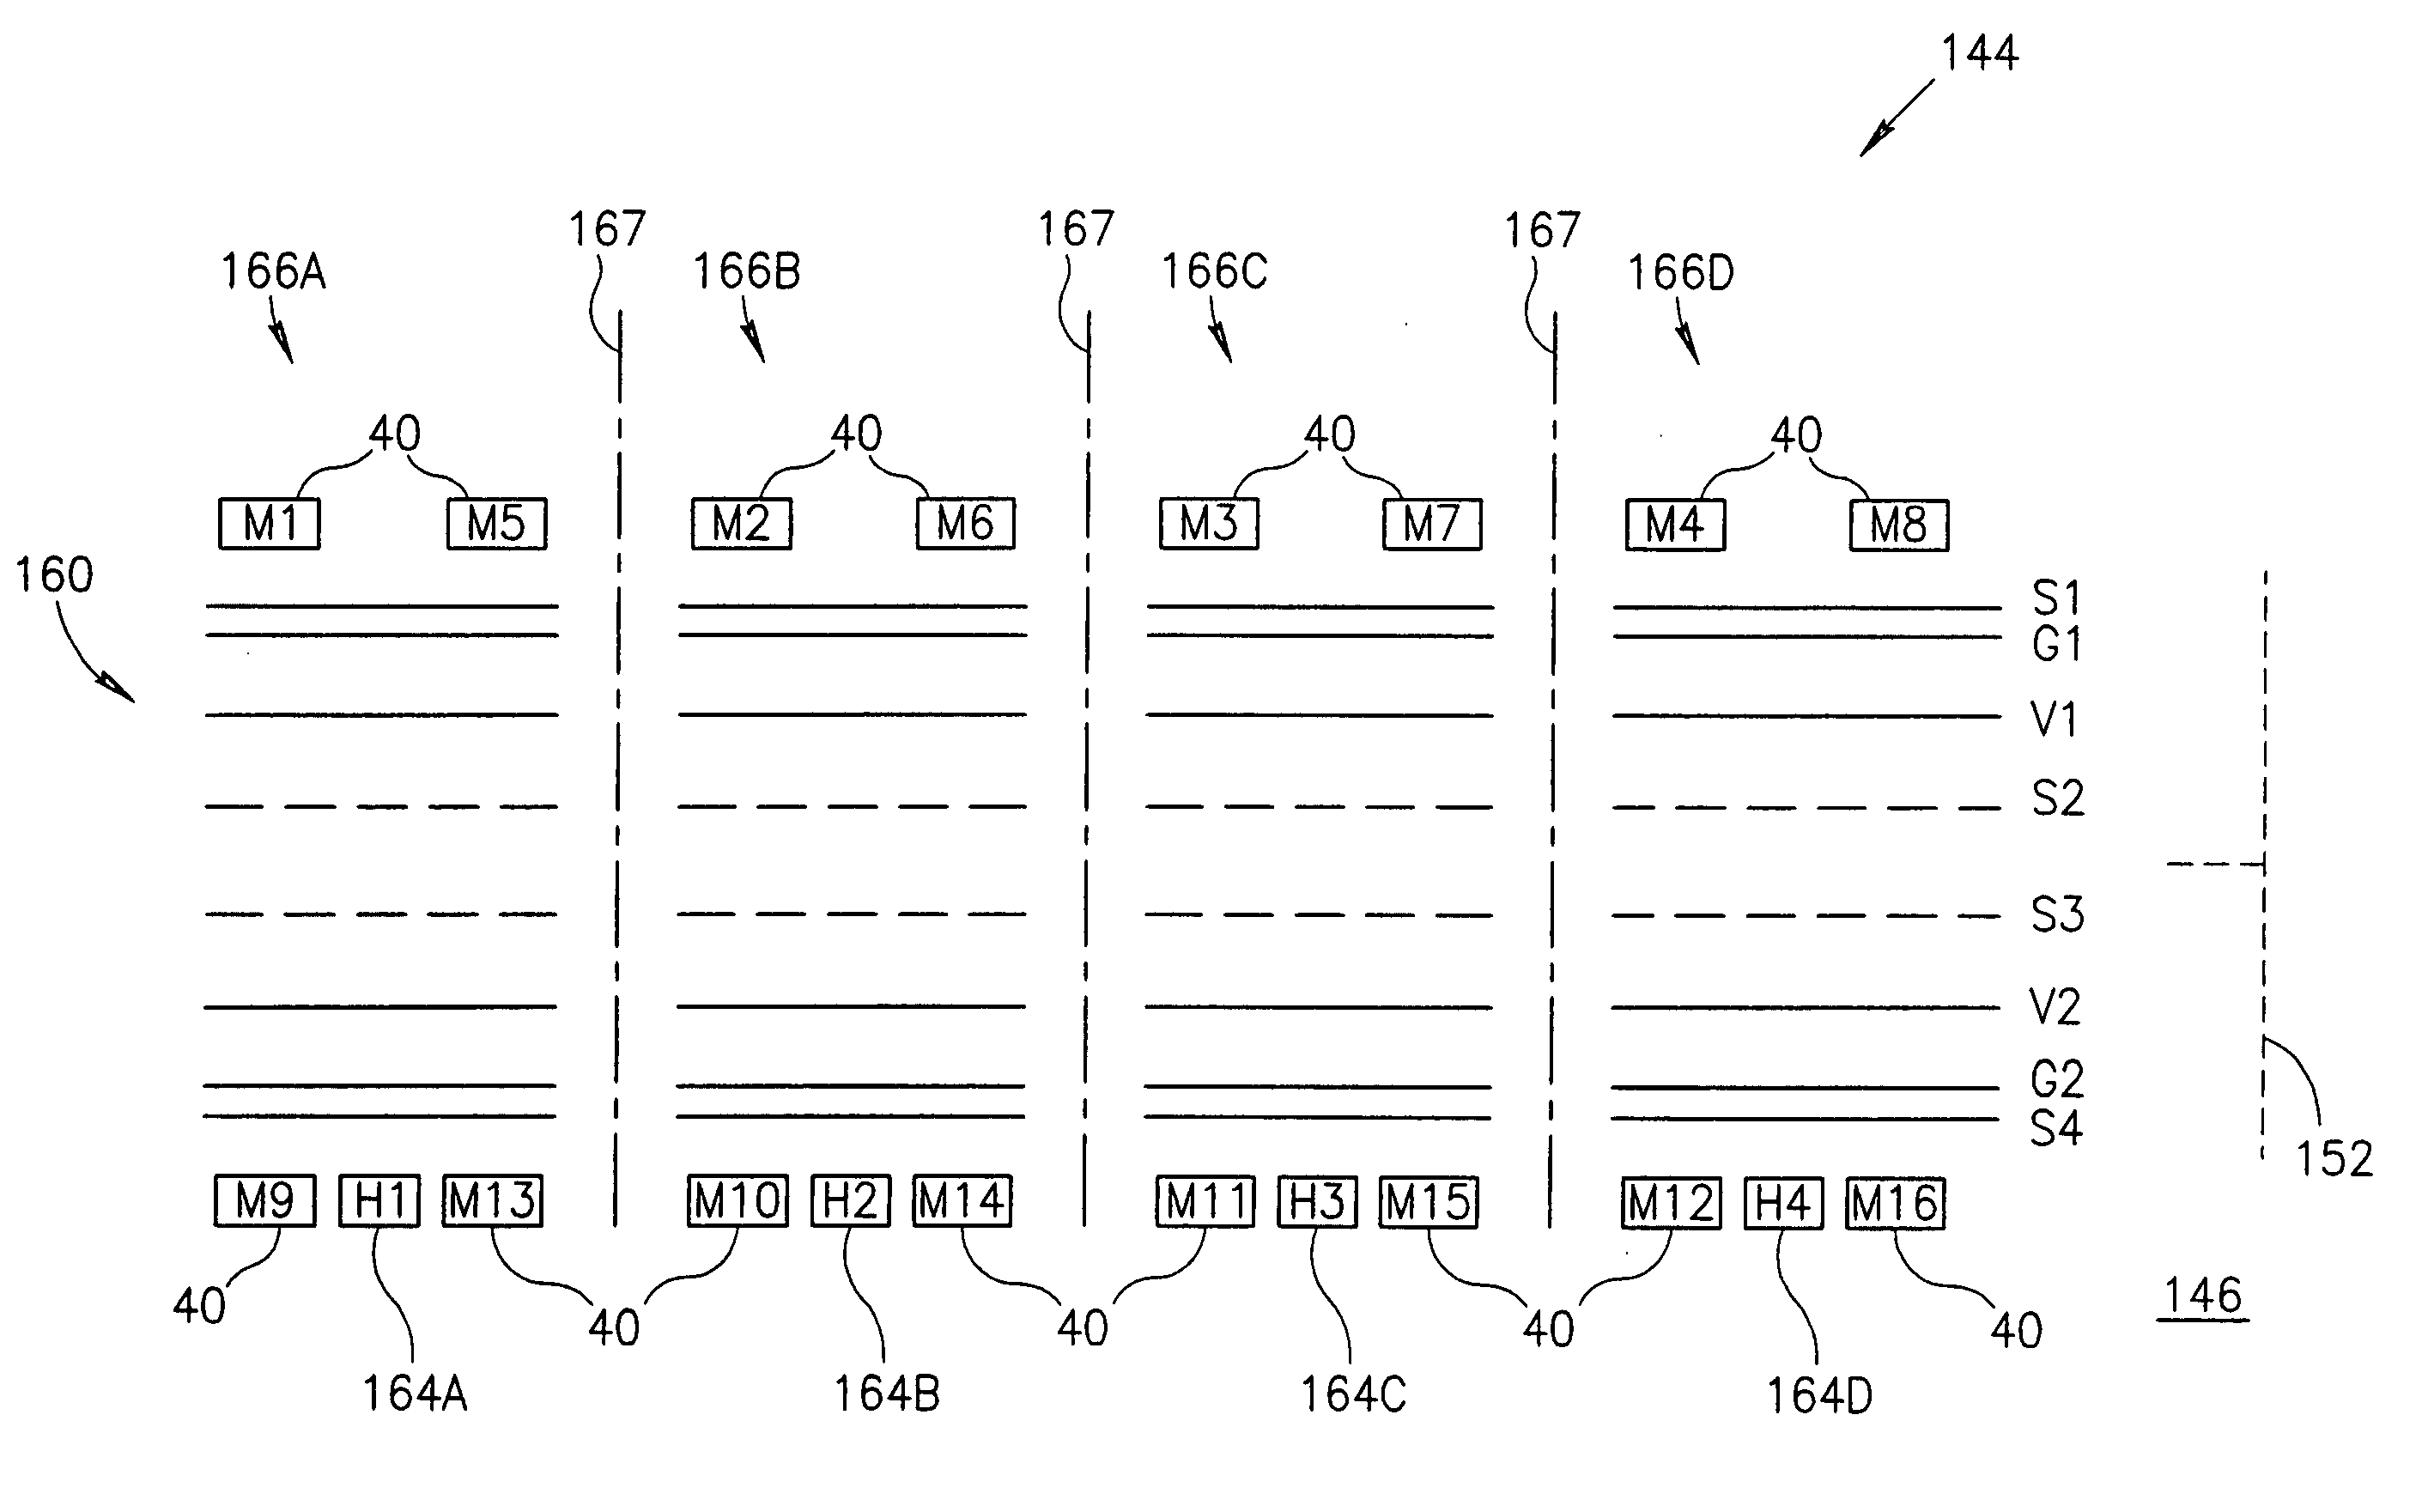 Apparatus and methods for a physical layout of simultaneously sub-accessible memory modules